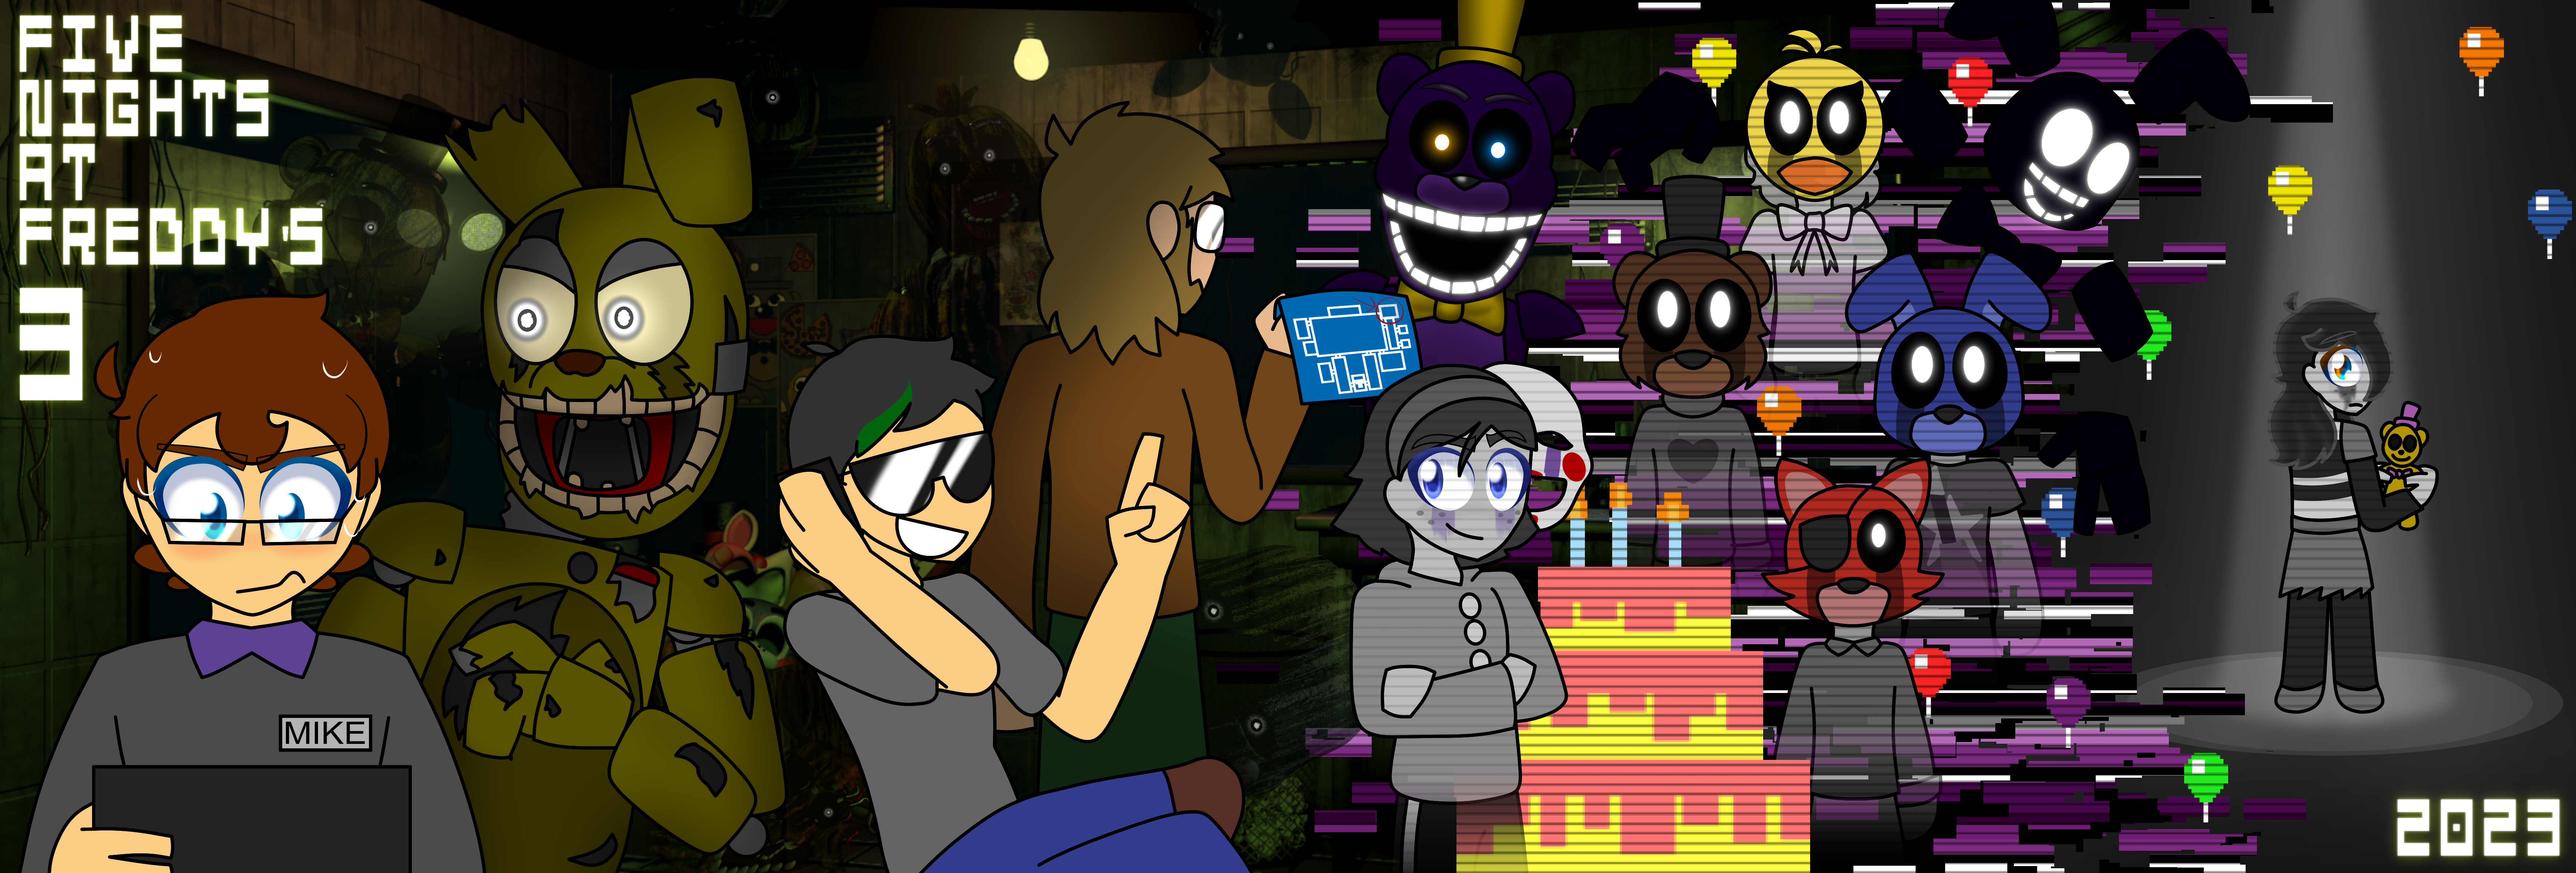 Five nights at Freddy's Birthday in 2023